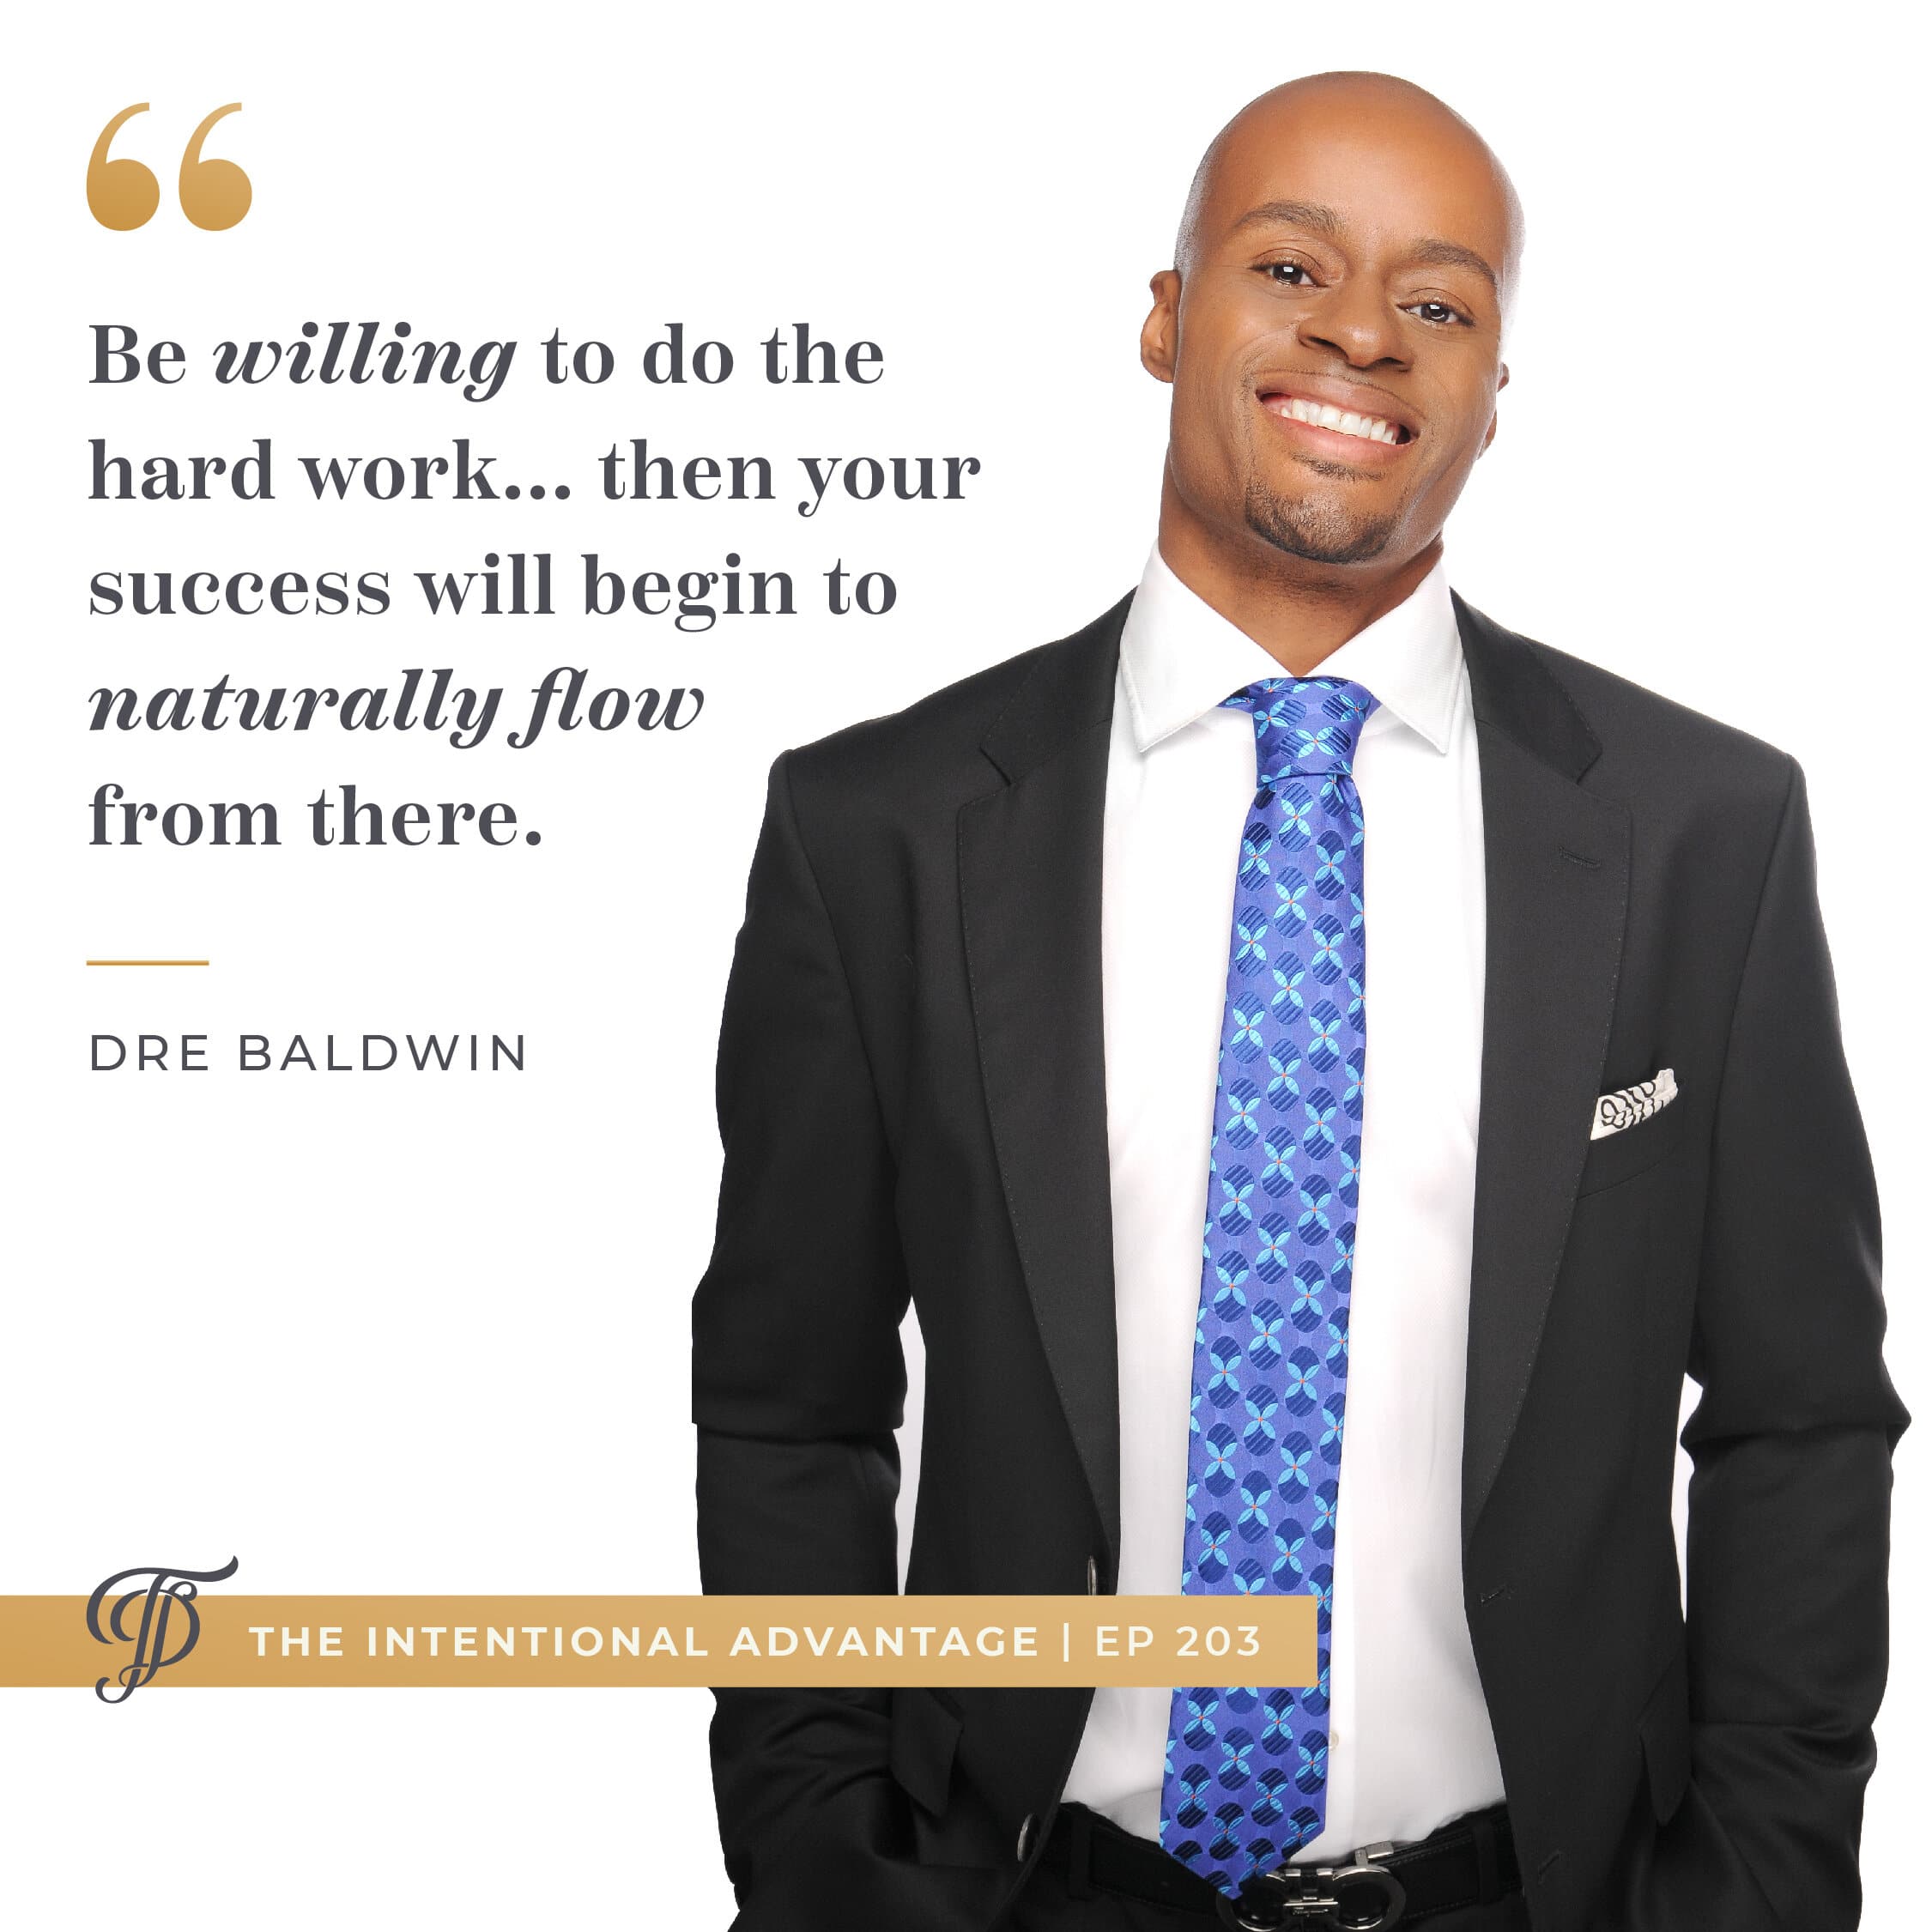 Dre Baldwin podcast interview on The Intentional Advantage